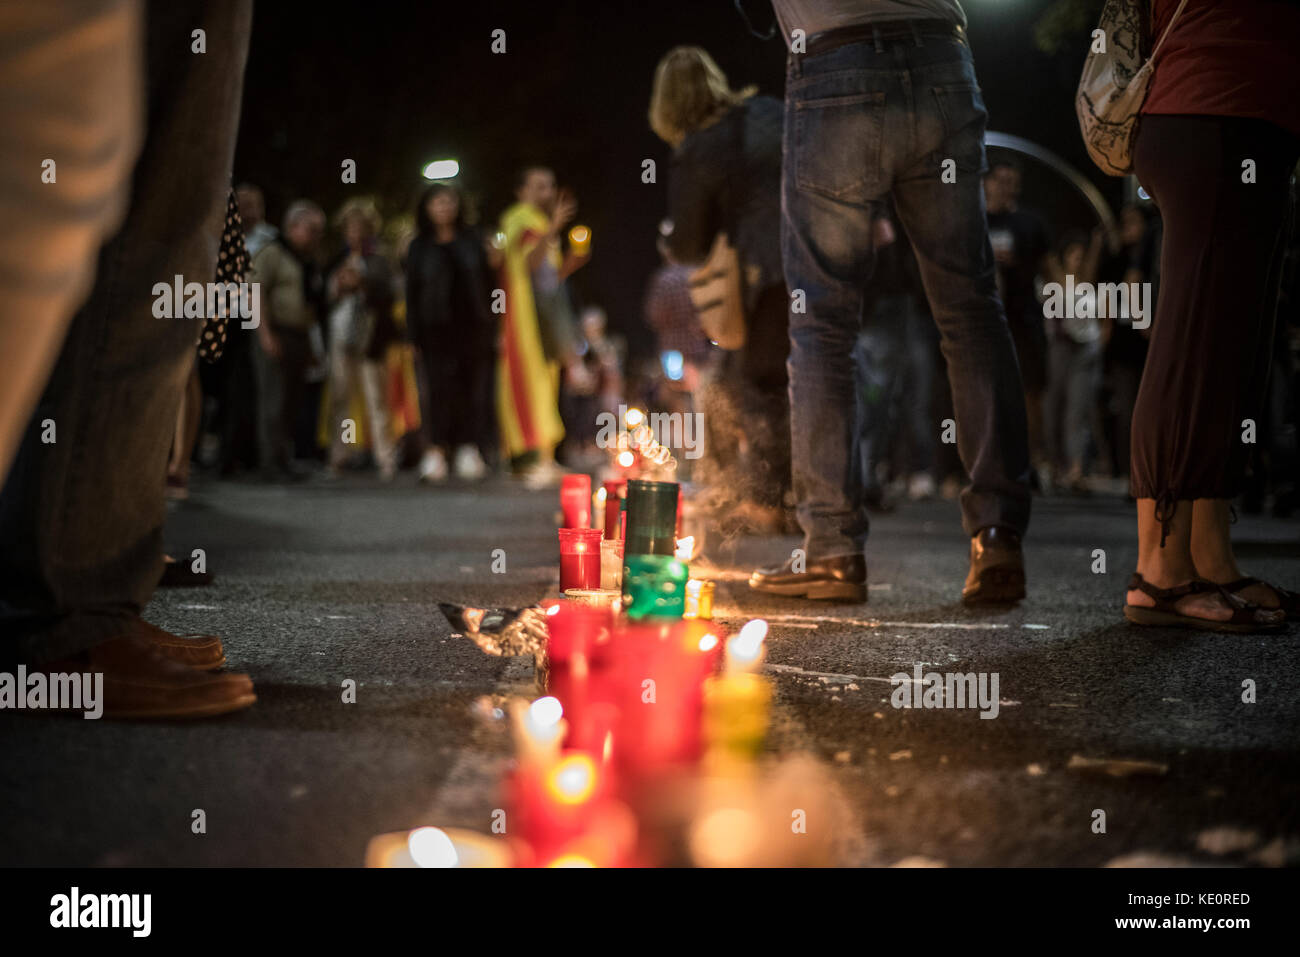 Barcelona, Spain. 17th Oct, 2017. Thousands of people demonstrating in Barcelona against the imprisonment of Jordi Sánchez and Jordi Cuixart, holding candles. Sánchez and Cuixart, leaders of the two main independence organizations, have been sent to unconditional imprisonment for a possible sedition crime. The case starts from the conventions convened by the two organizations against the arrest of members of the Catalan government. Credit: Carles Desfilis / Alamy Live News Stock Photo